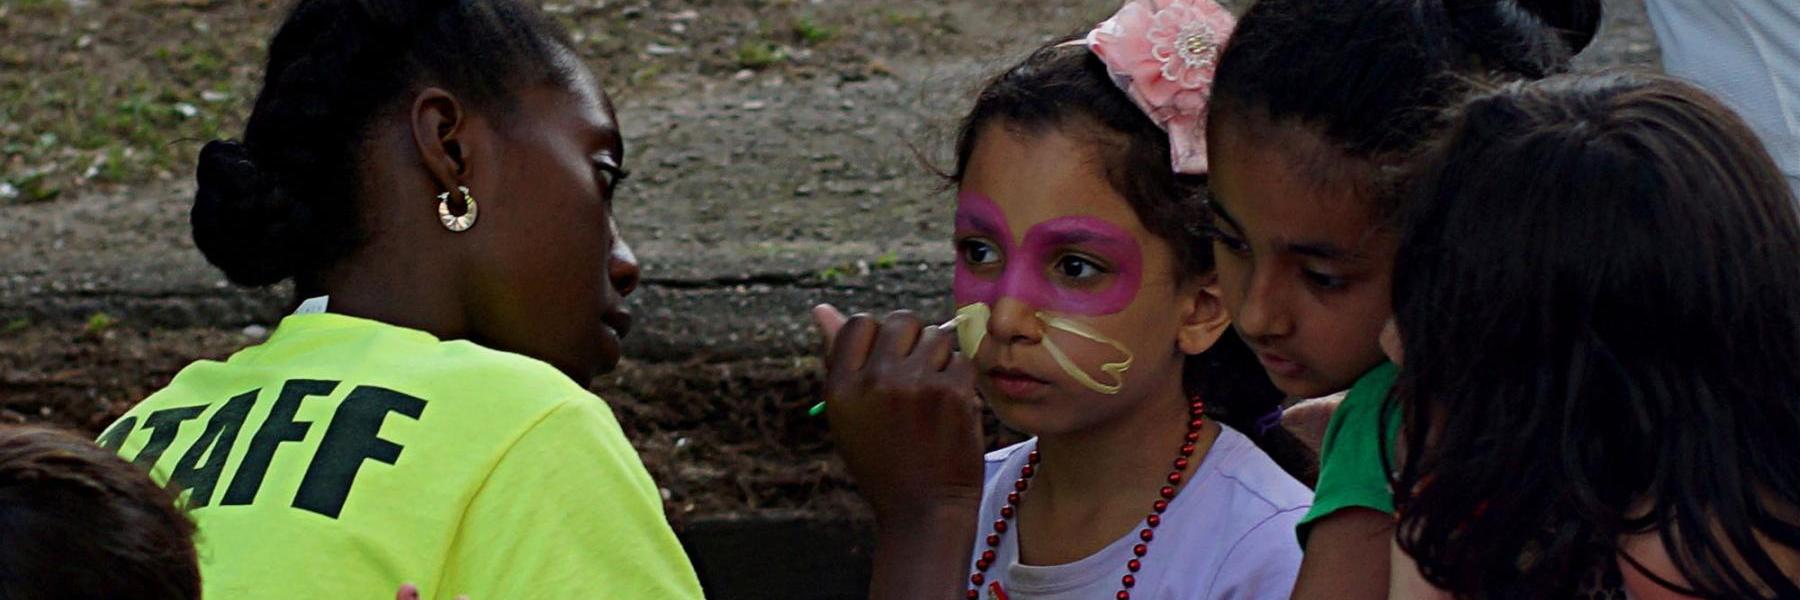 Child having their face painted